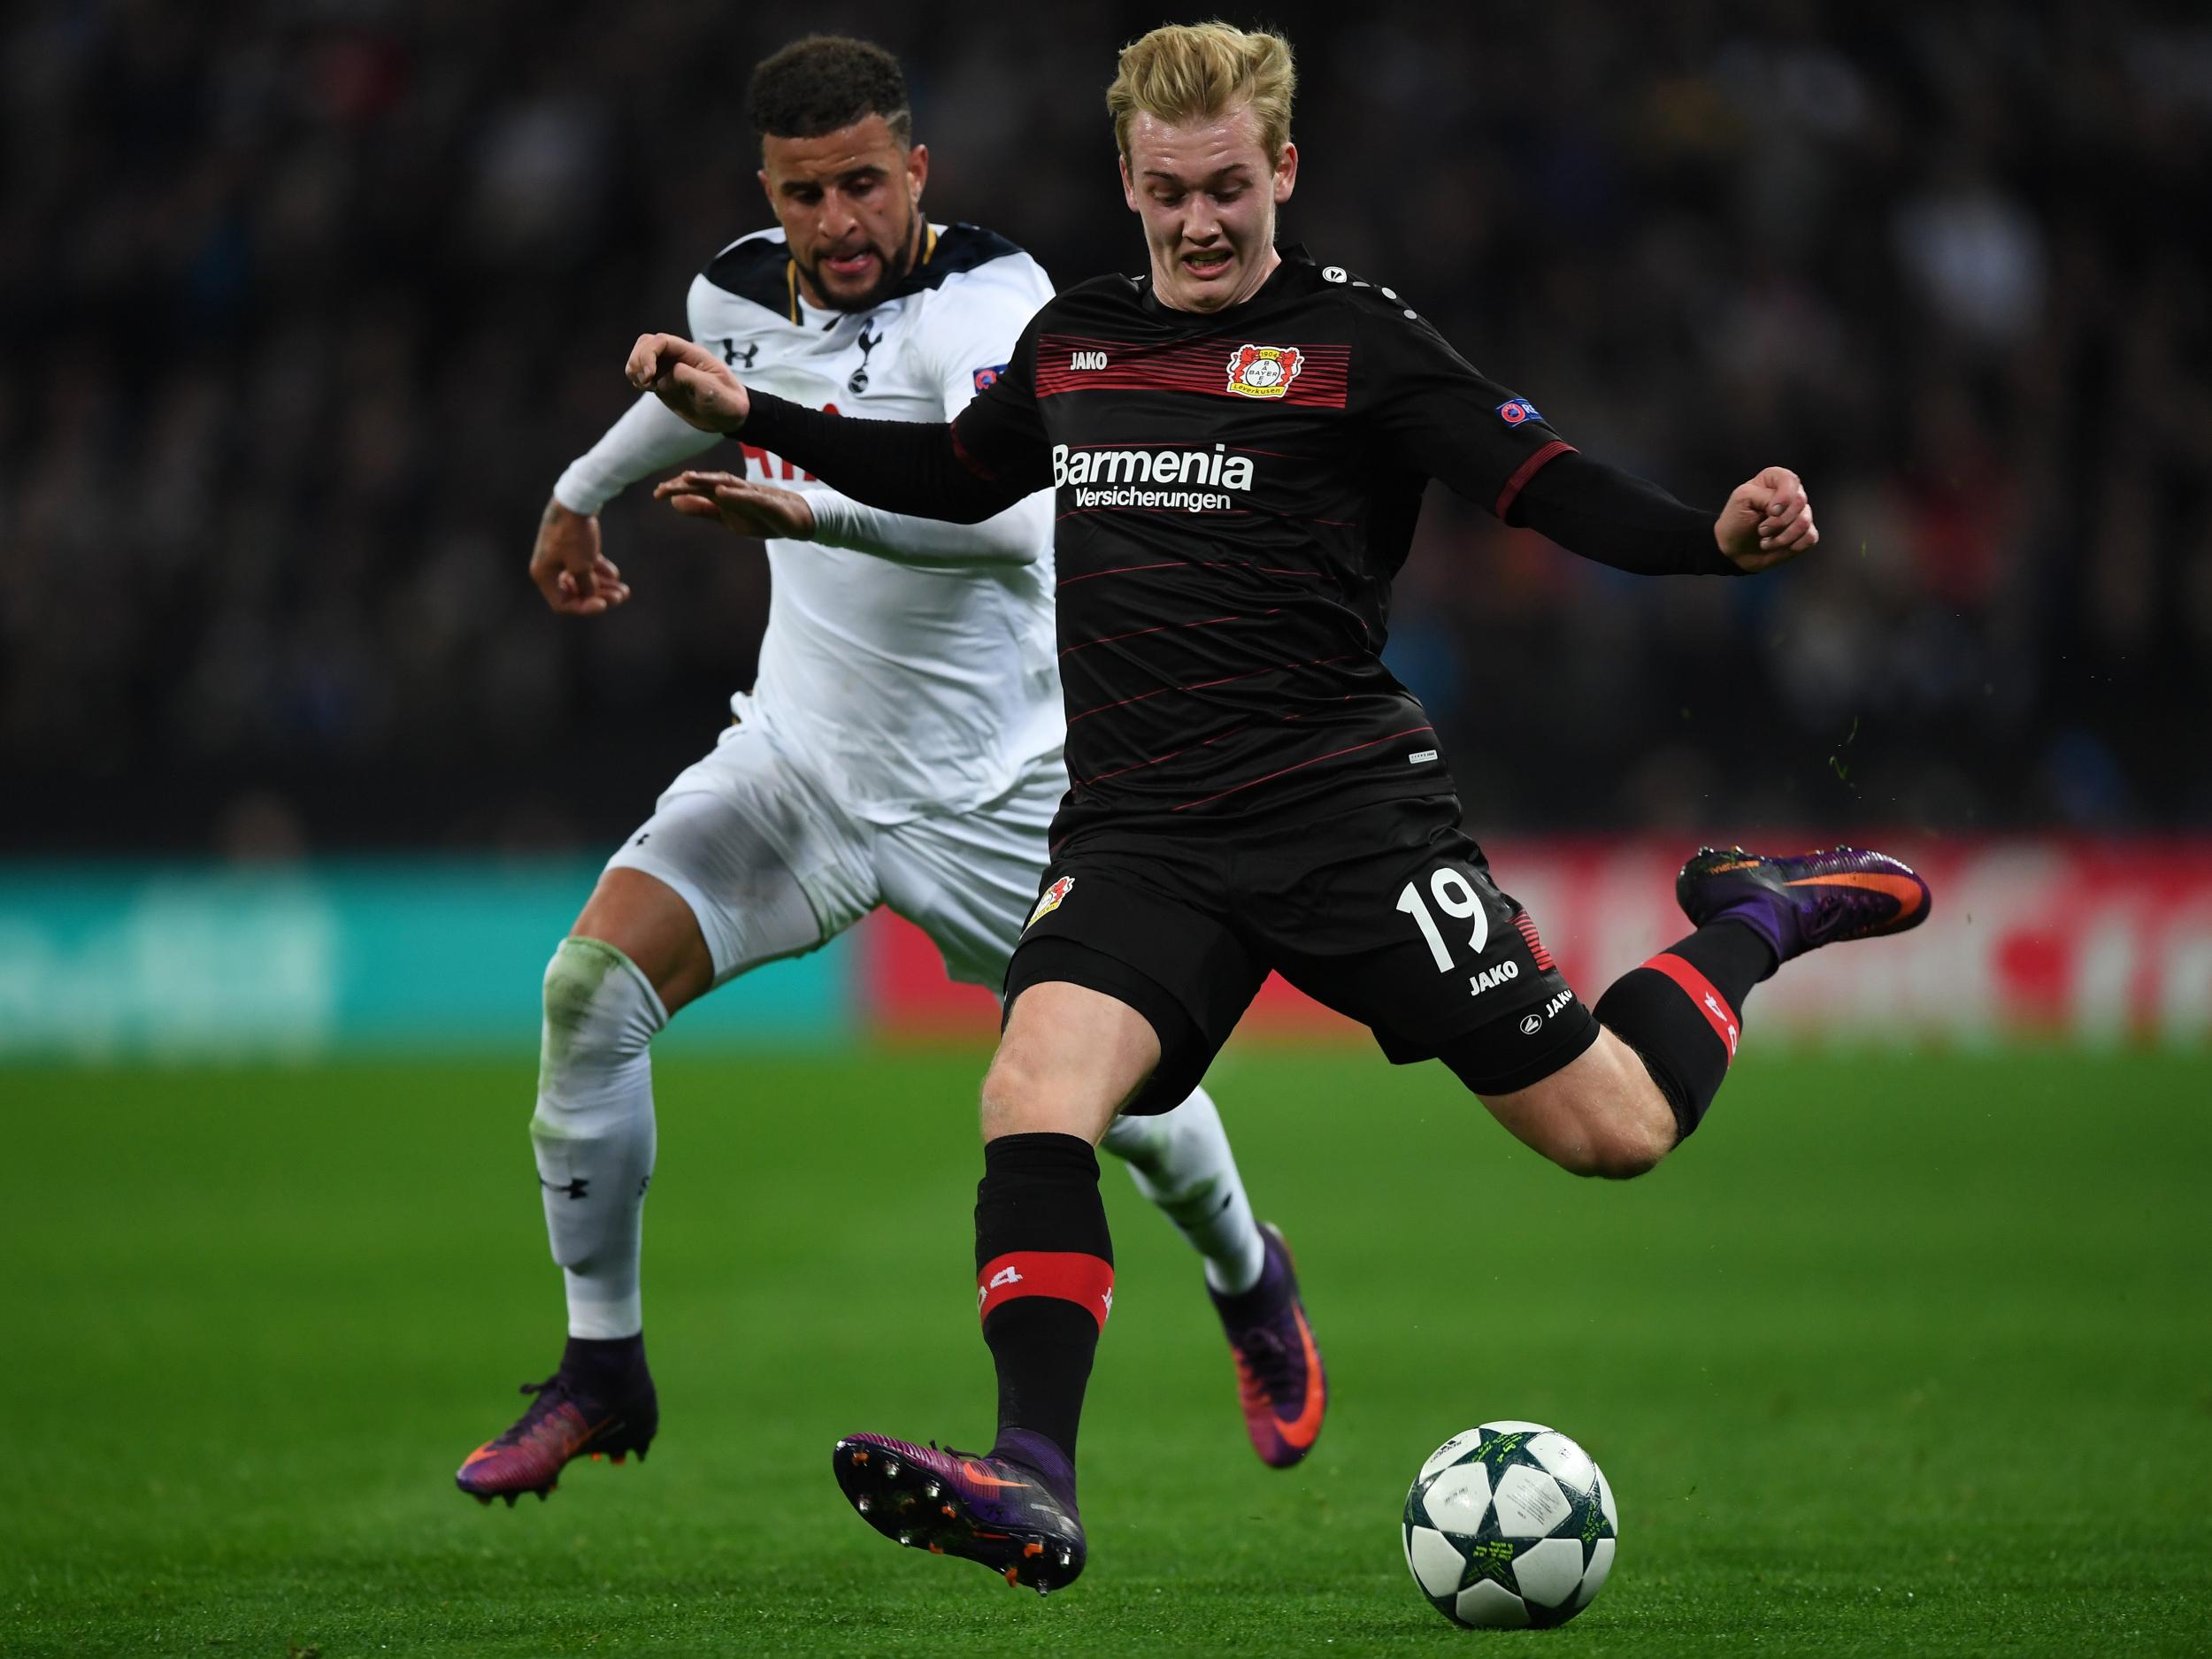 Julian Brandt impressed against Spurs in the Champions League